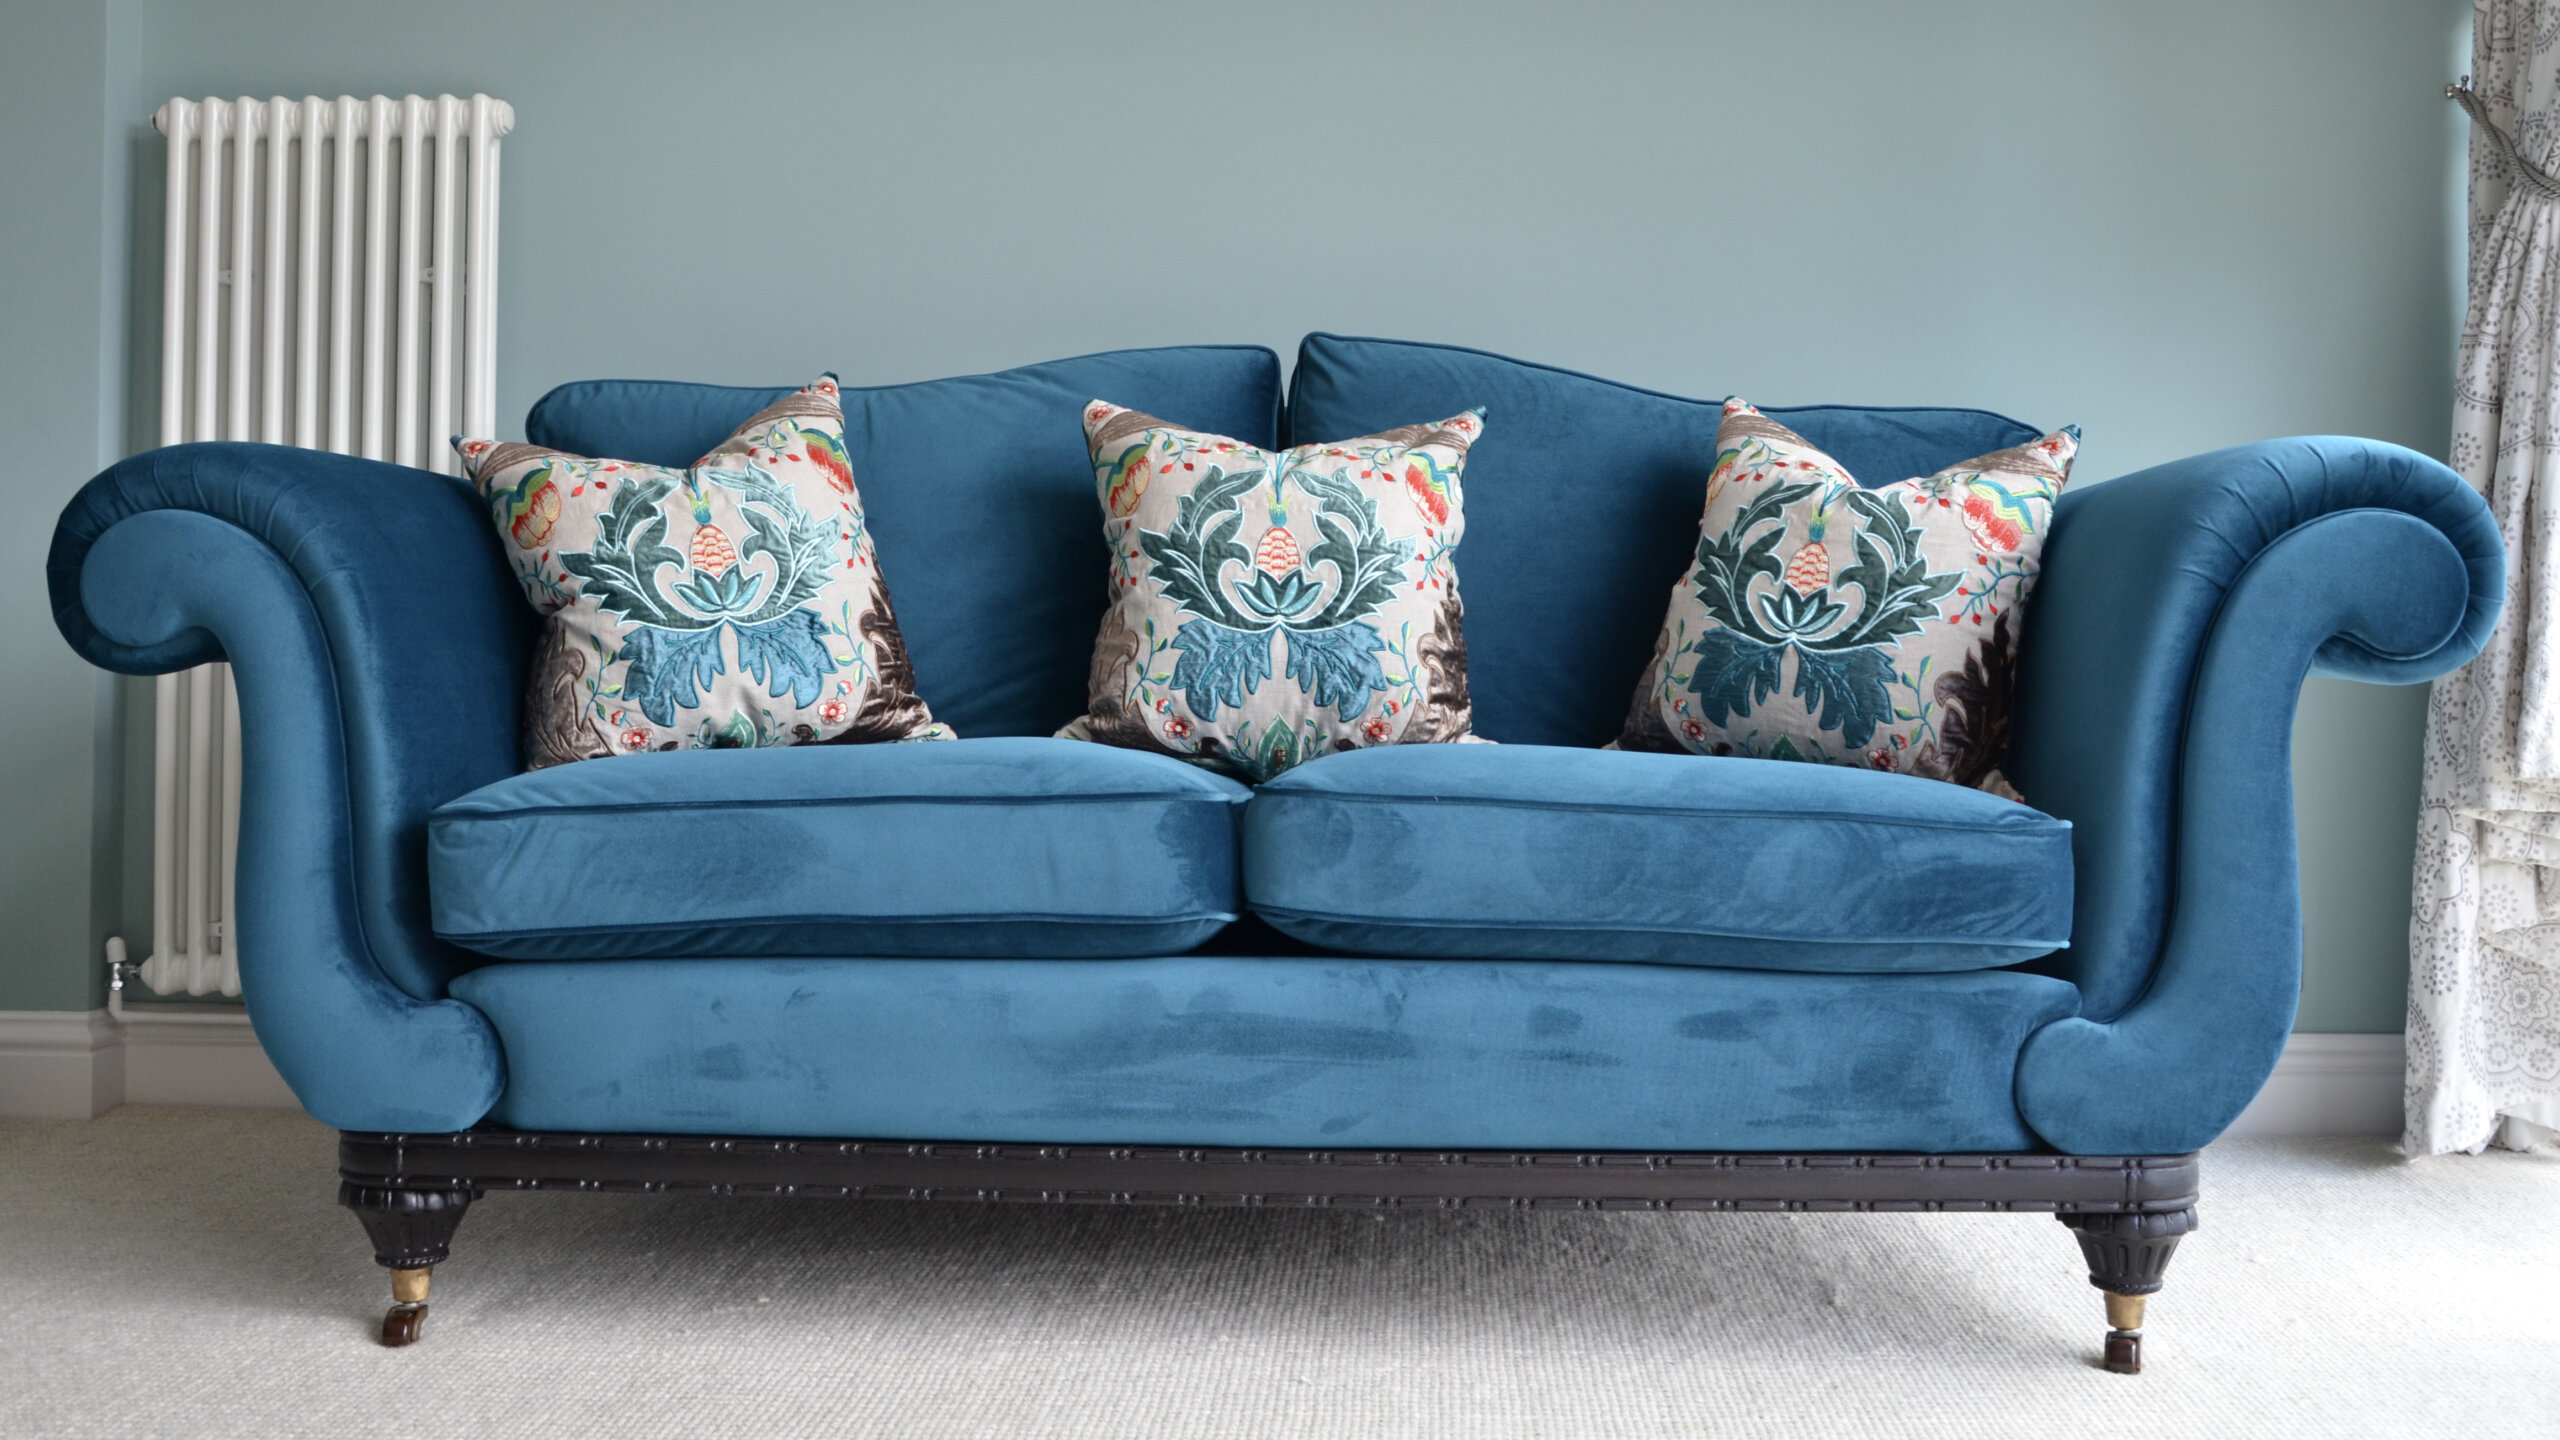 Furniture Reupholstery and Soft Furnishings